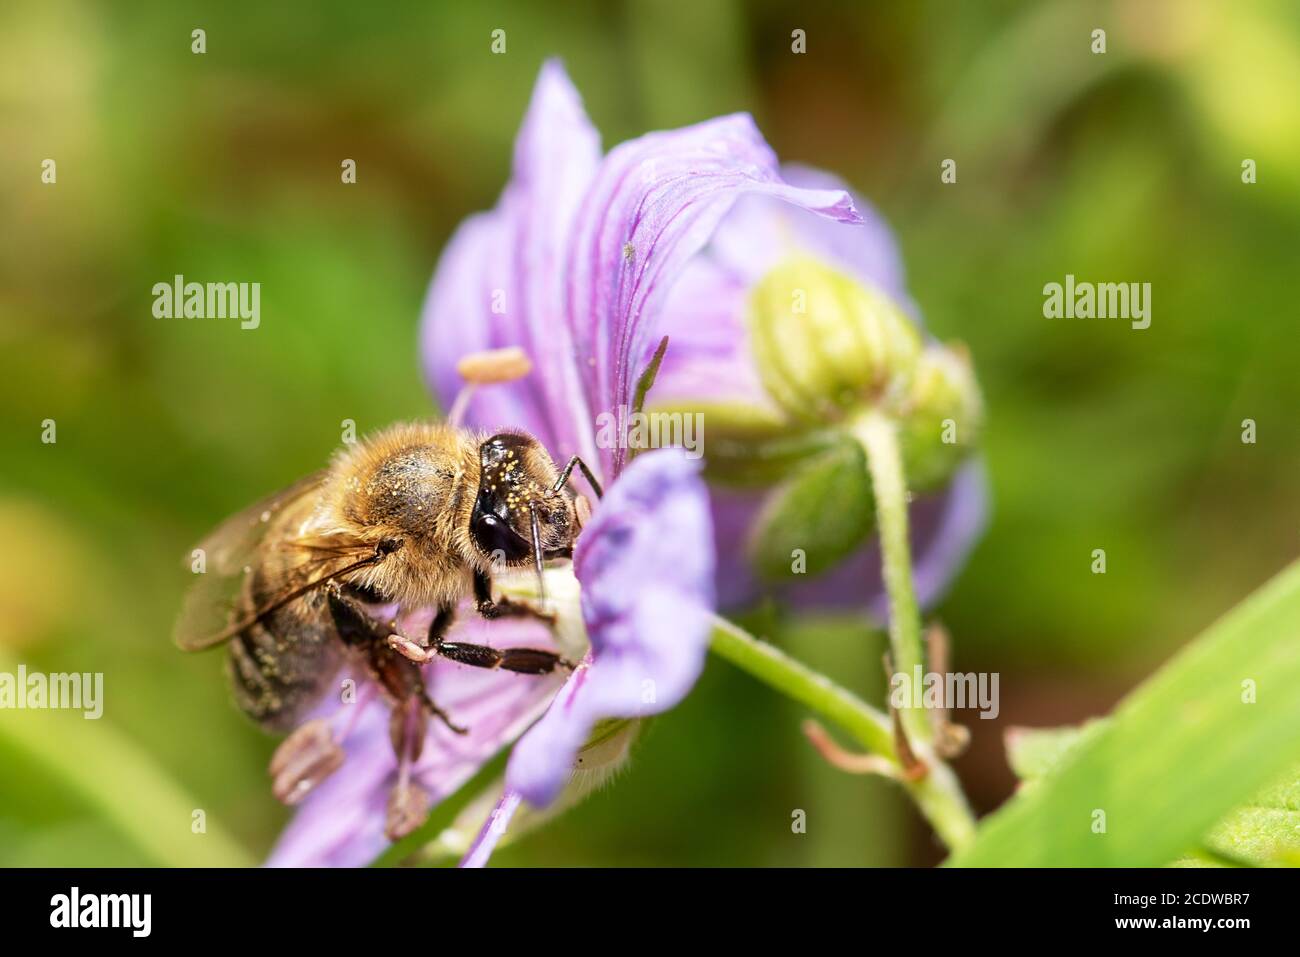 Bee on a flower close-up, macro Stock Photo